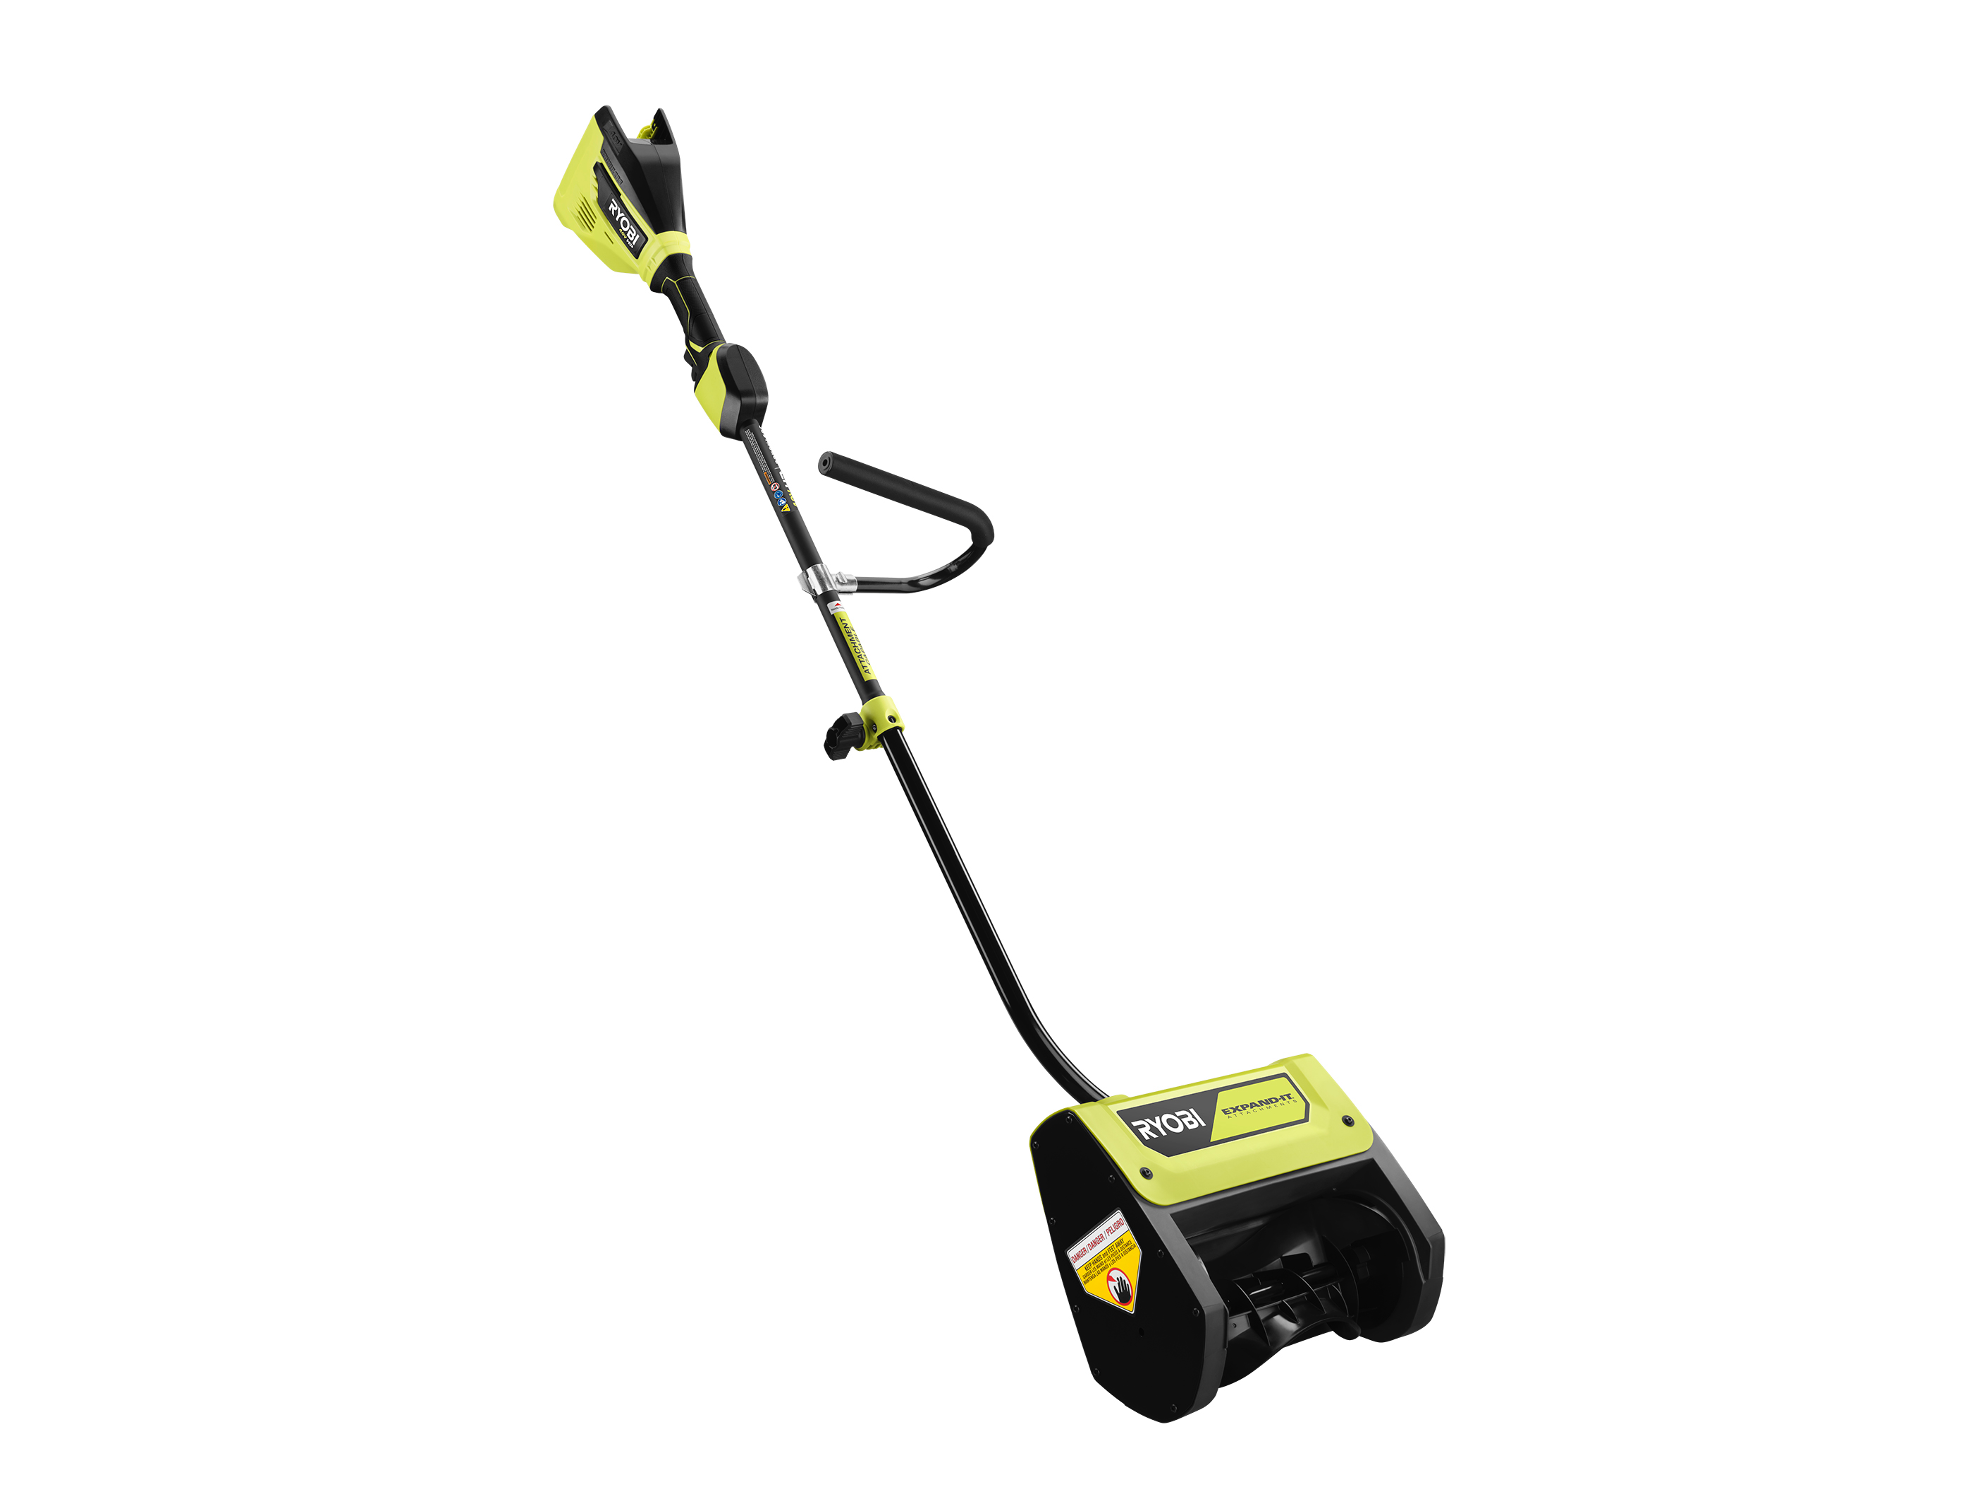 Product Features Image for 40V HP BRUSHLESS SNOW SHOVEL KIT.